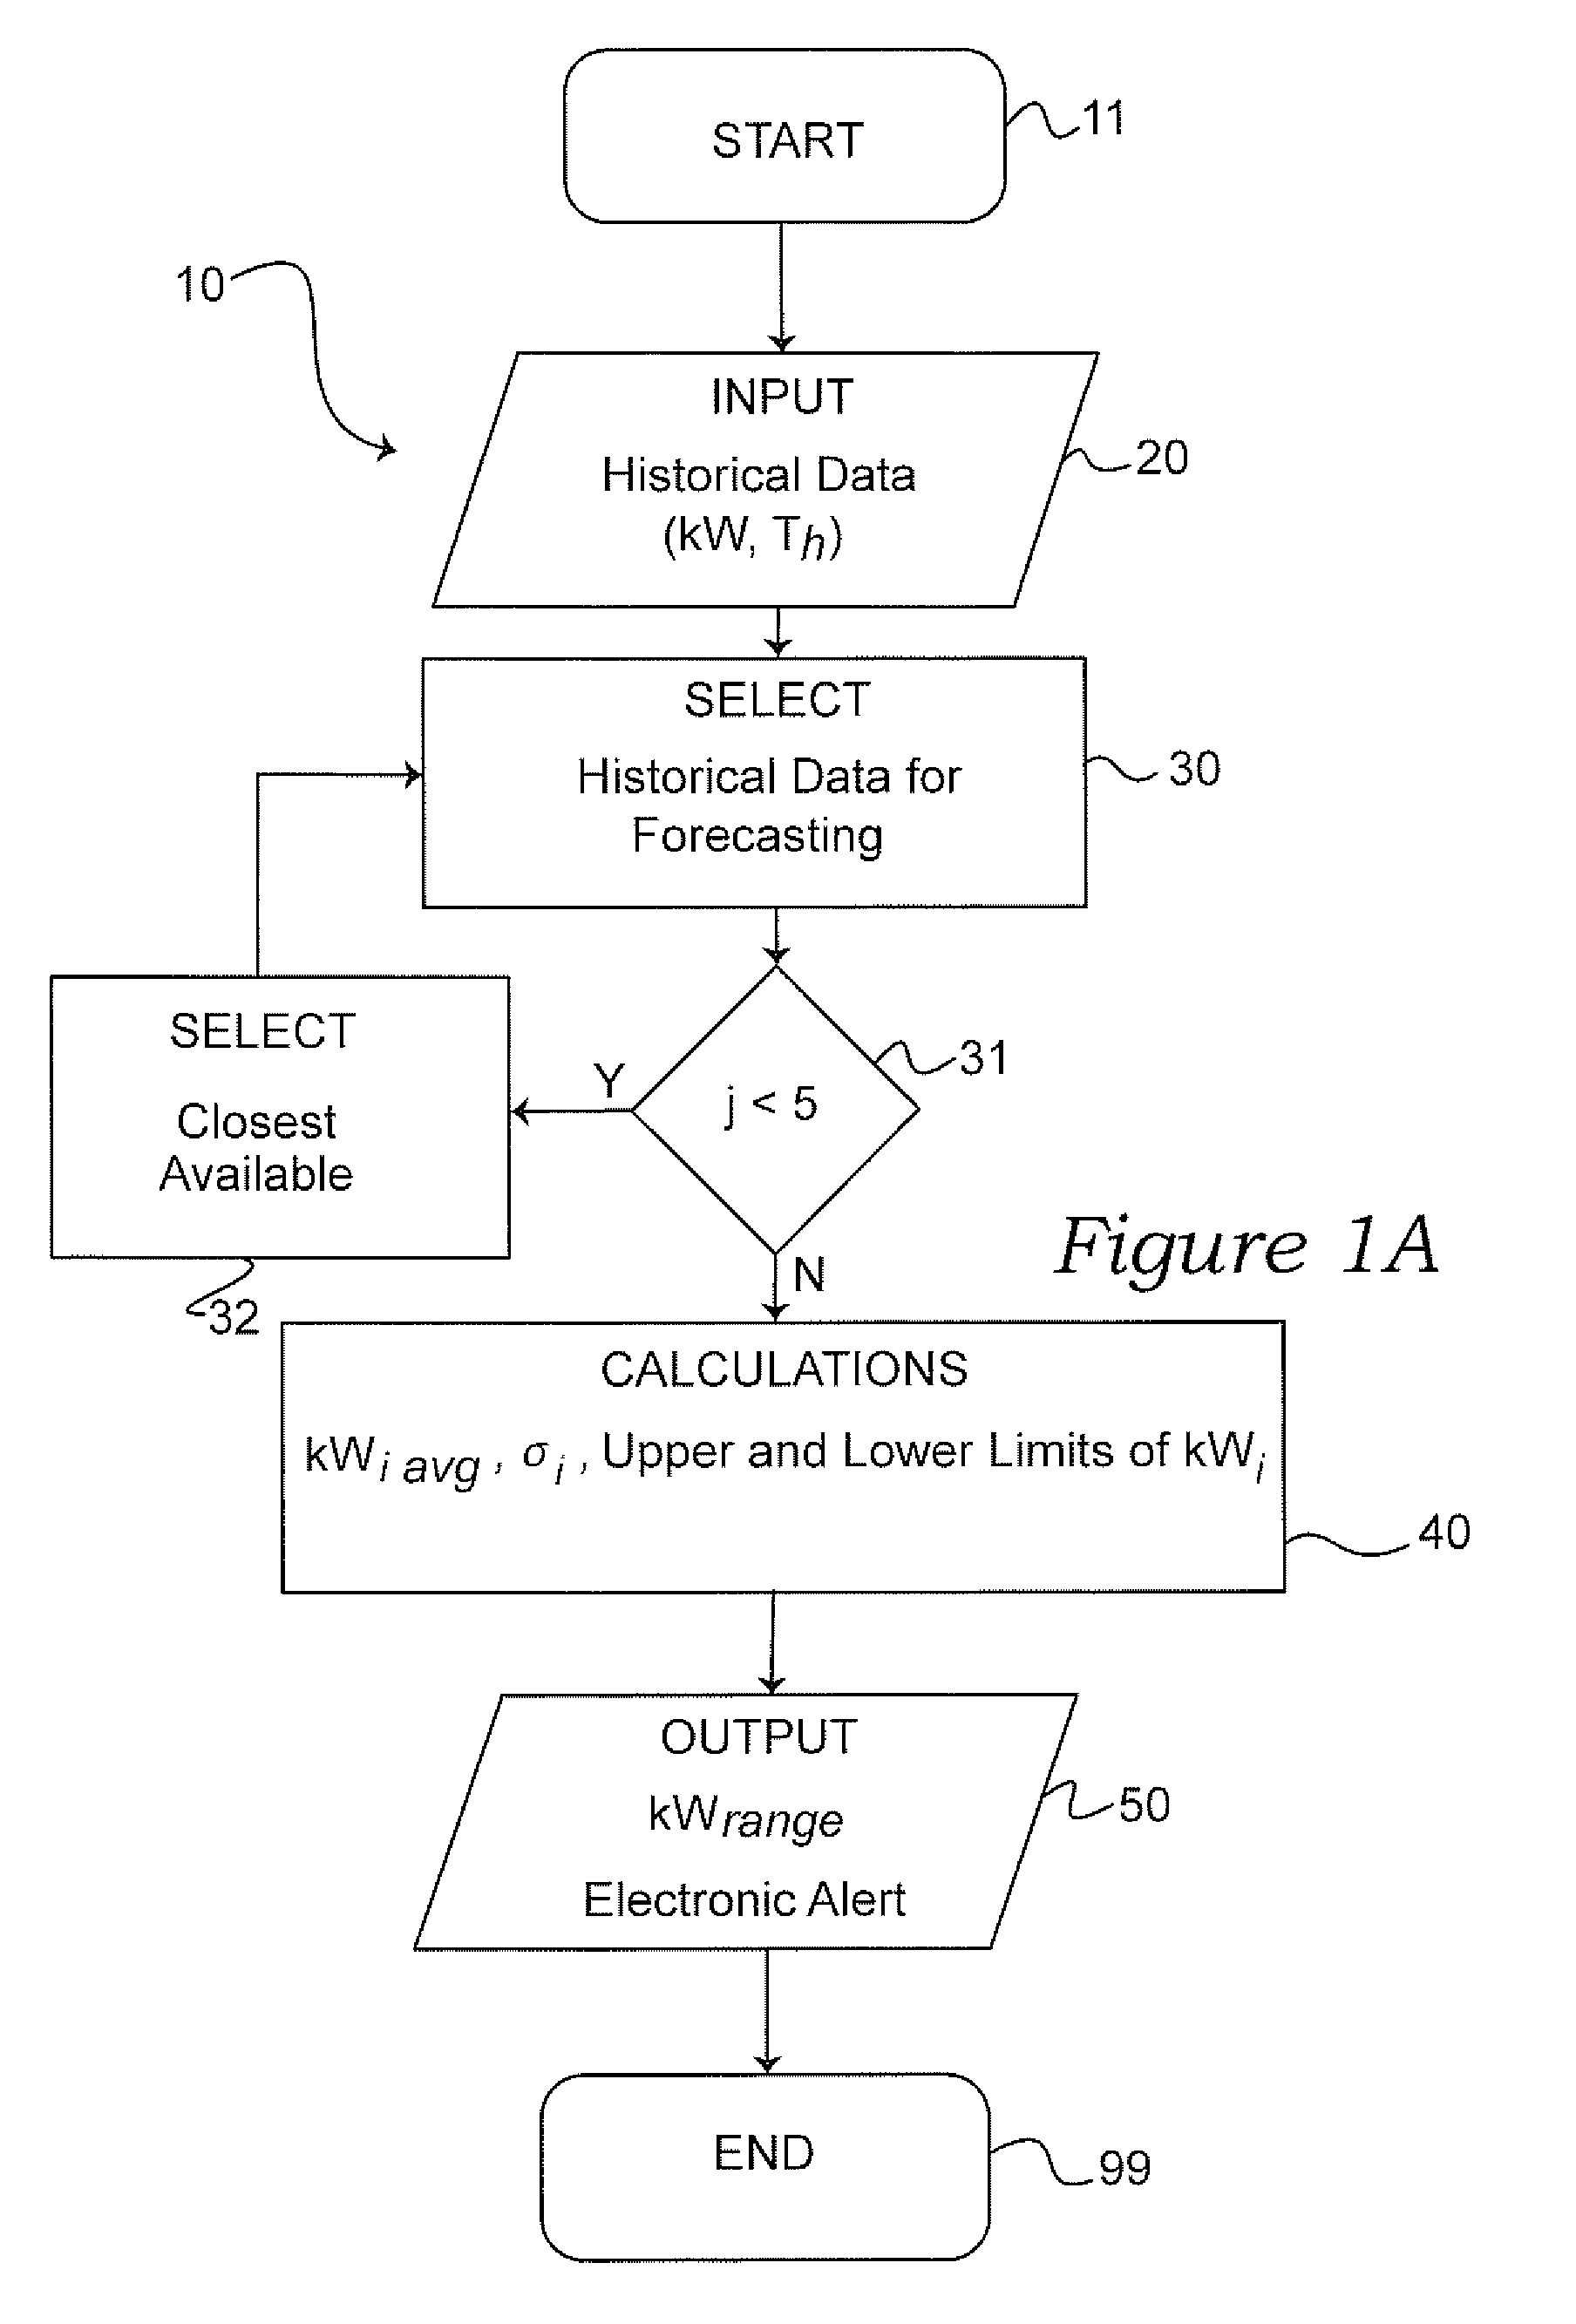 System and method for monitoring electrical demand performance, particularly using historical data and an outside temperature